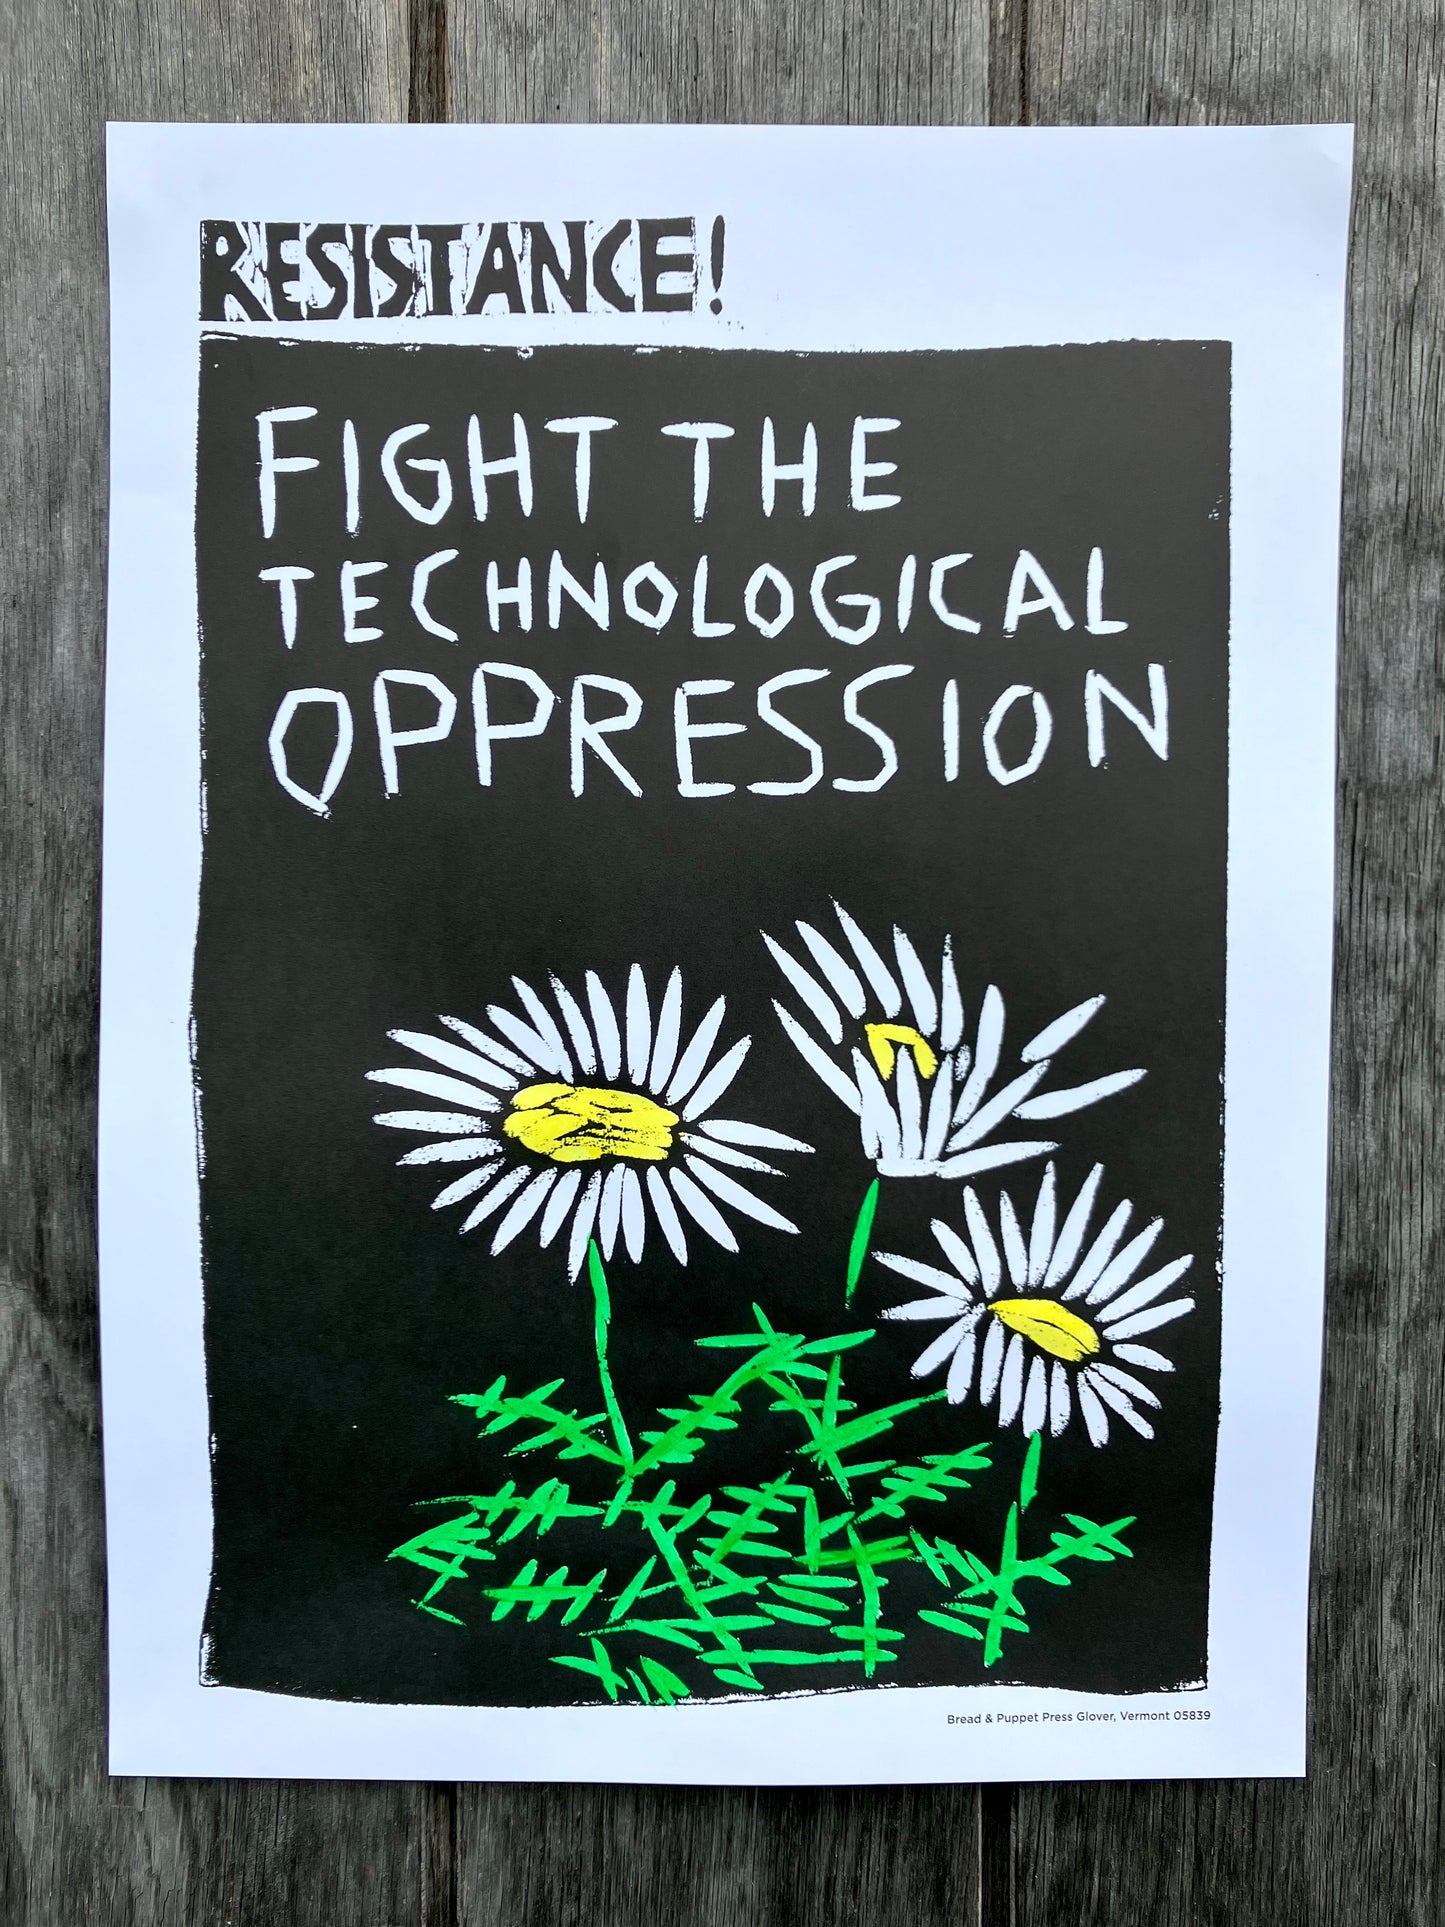 Resistance! Fight the Technological Oppression